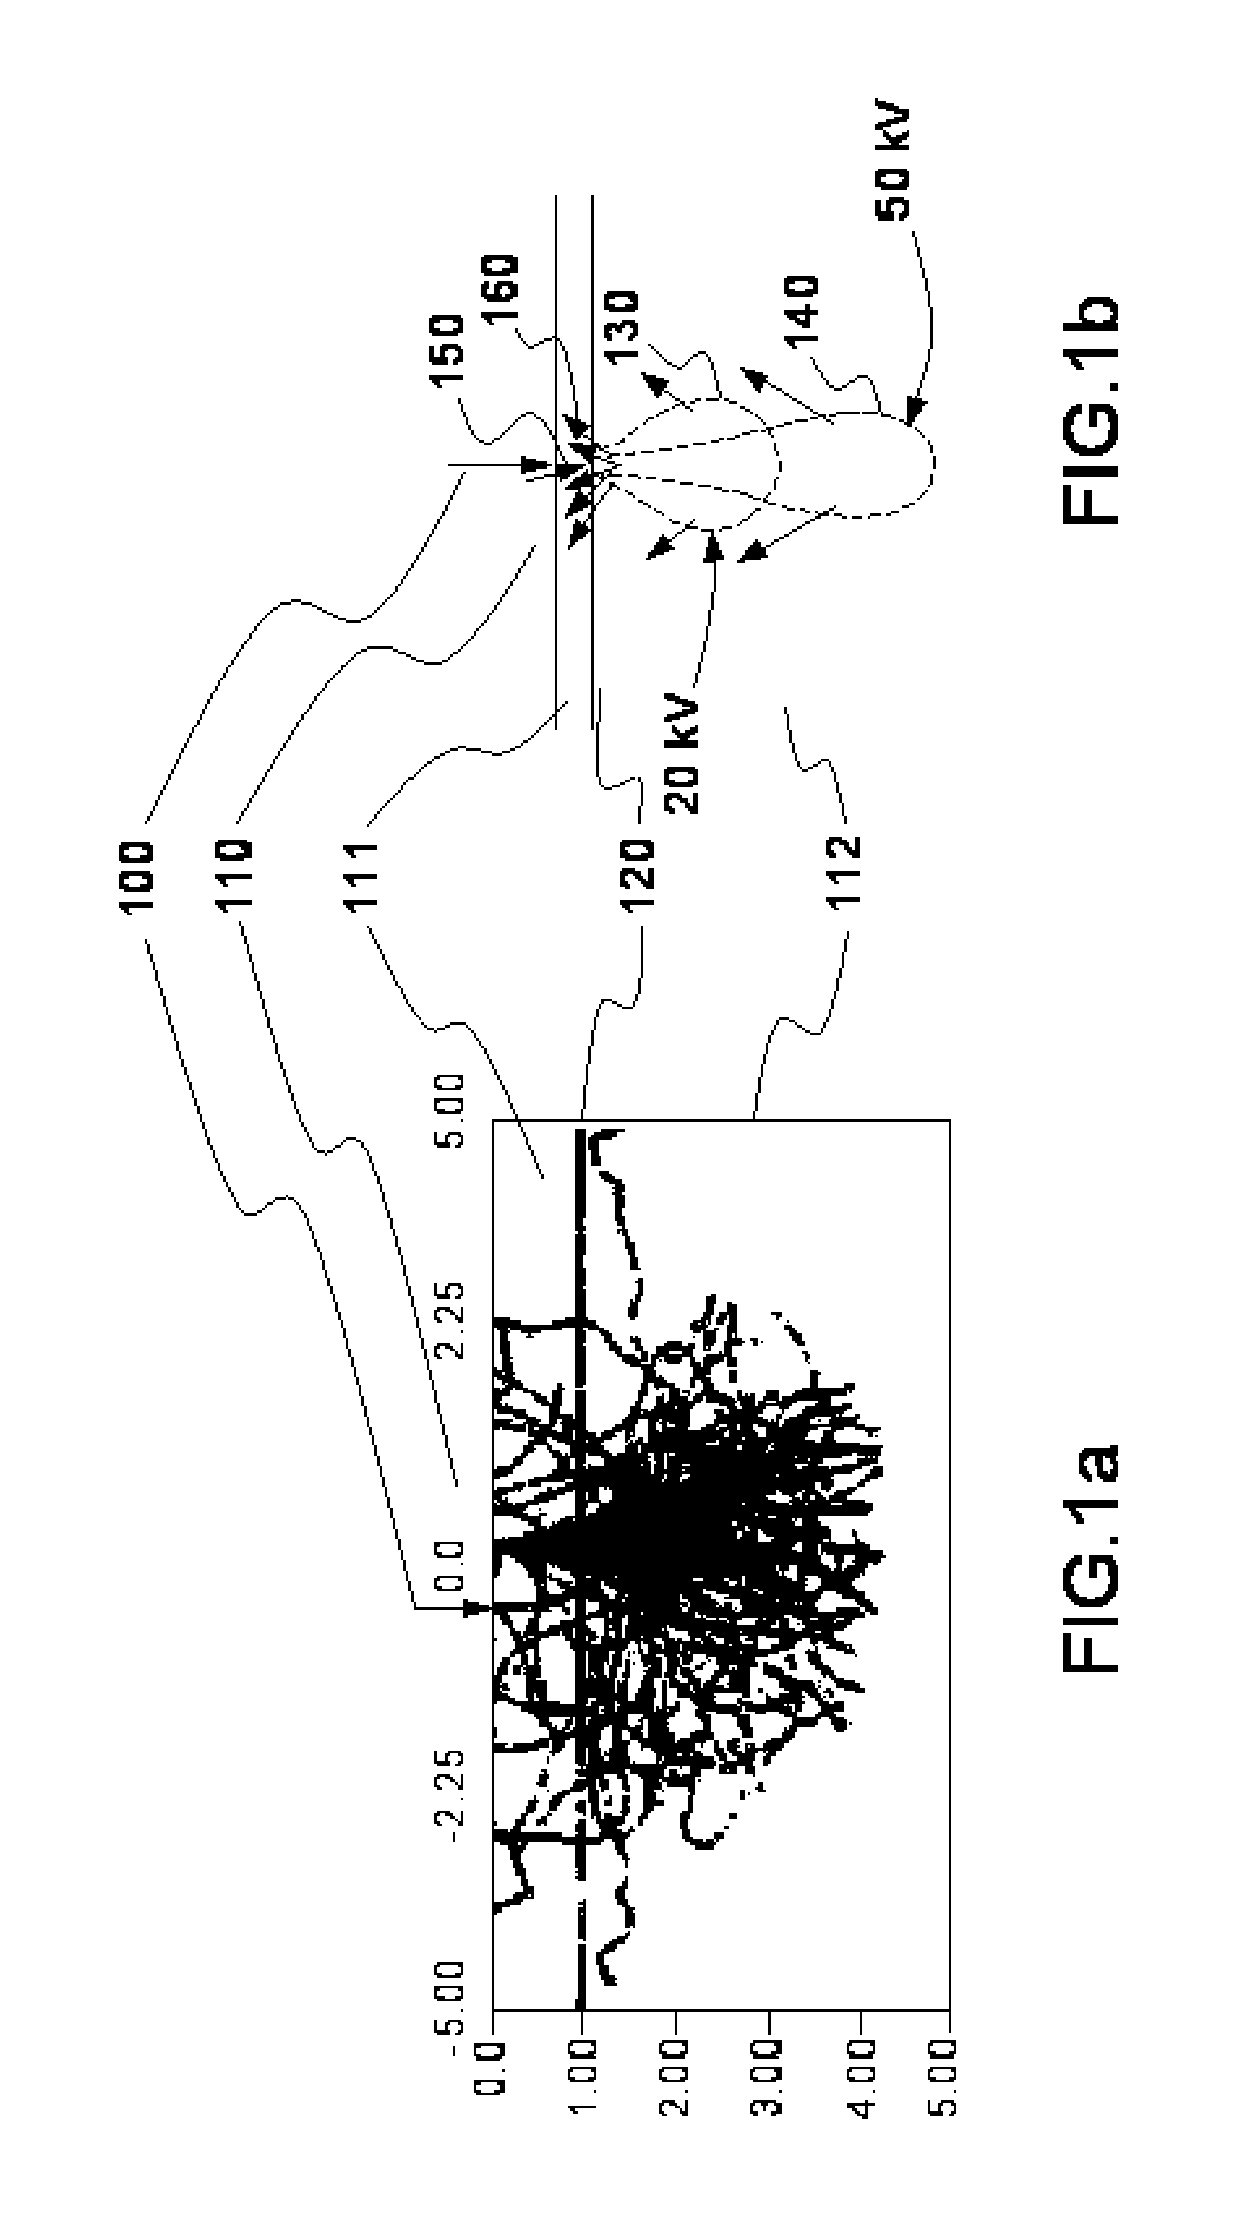 Method for correcting electronic proximity effects using off-center scattering functions